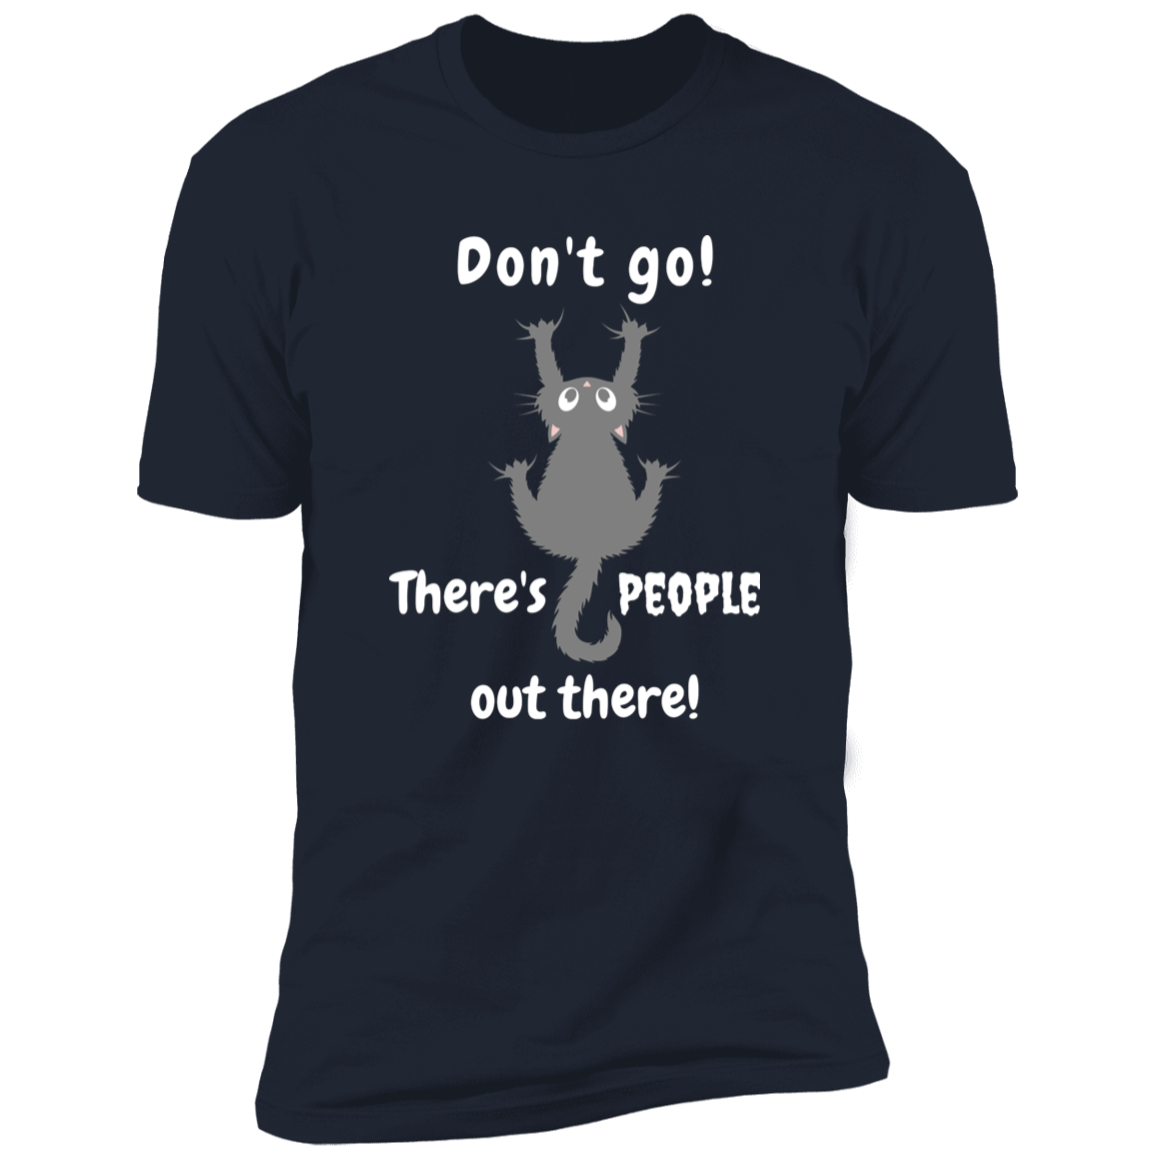 Don't Go! There are People Out there Shirt, funny cat shirt for humans, cat mom and cat dad shirt, in navy blue